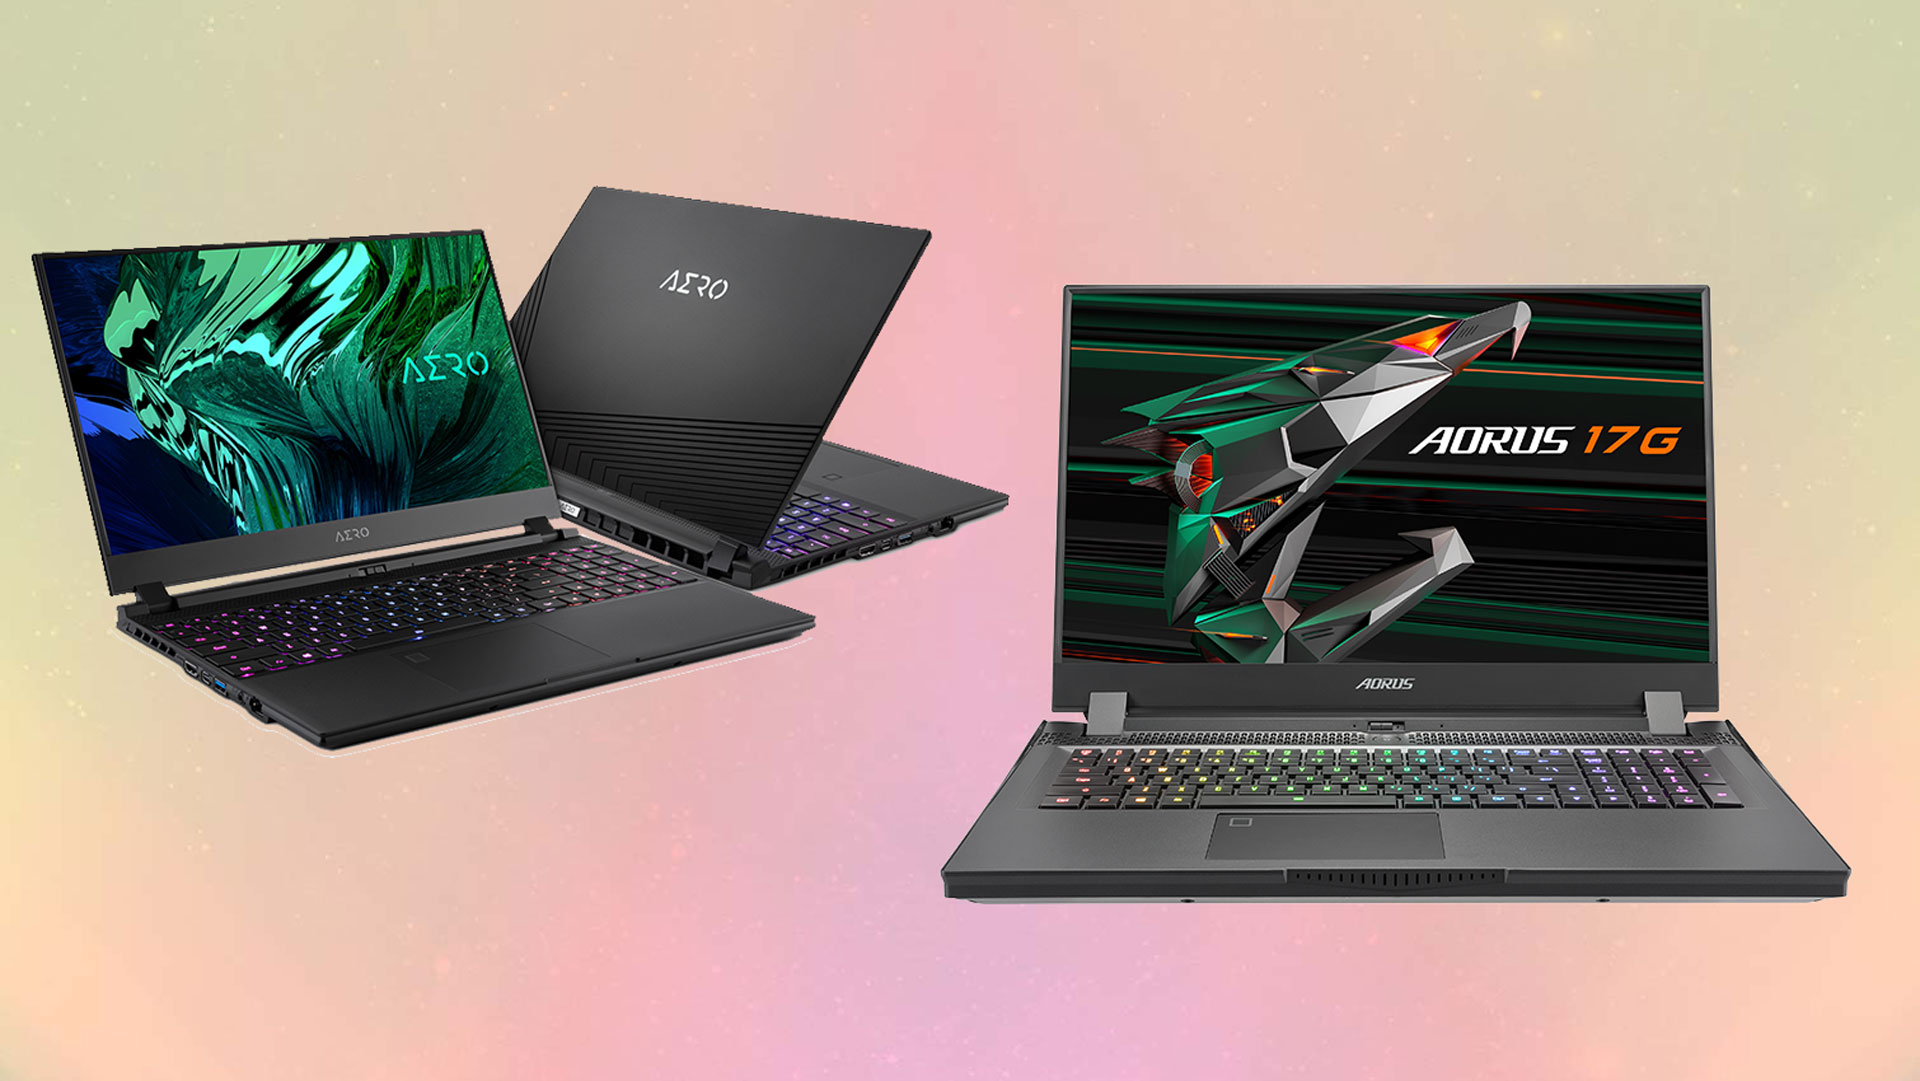 gigabyte-refreshes-laptops-for-gamers-and-creatives-with-rtx-30-series